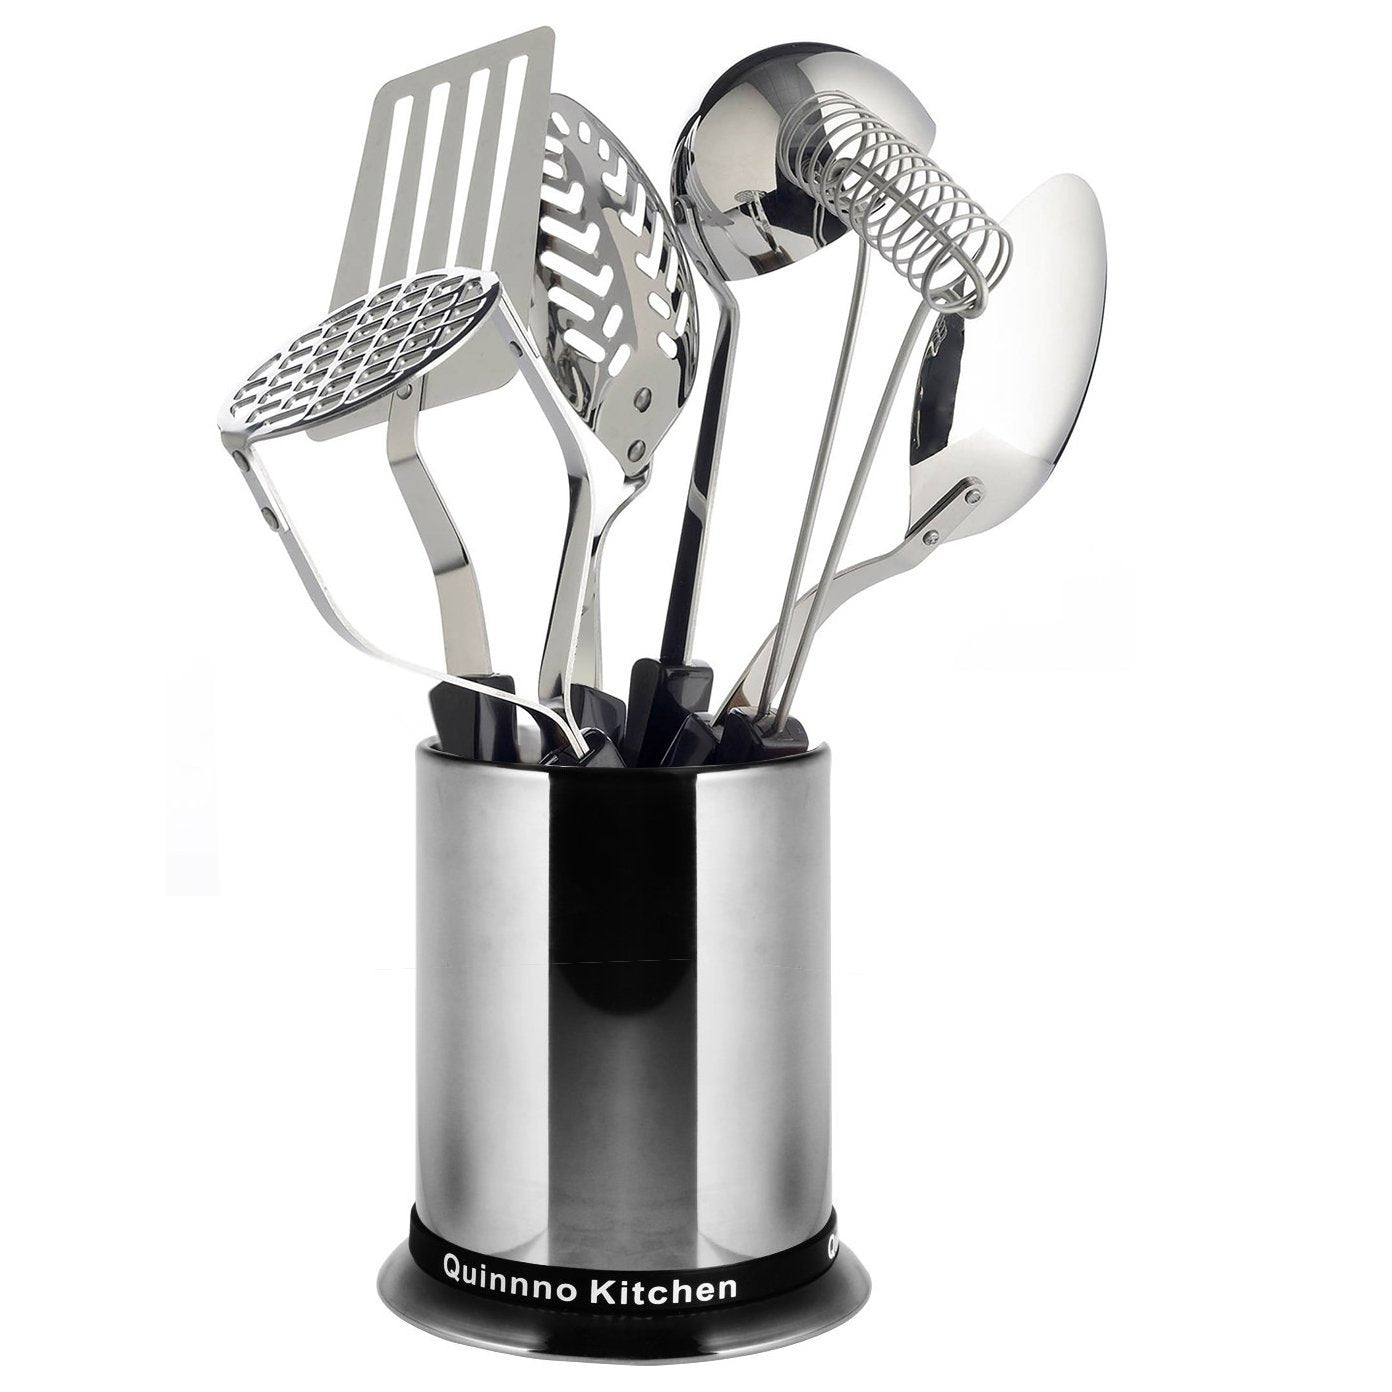 Spatula Holder | Stainless Steel Utensil Holder Strong Materials Tall Body and Contoured Bottom Keep Tools Upright Dishwasher Safe - 569